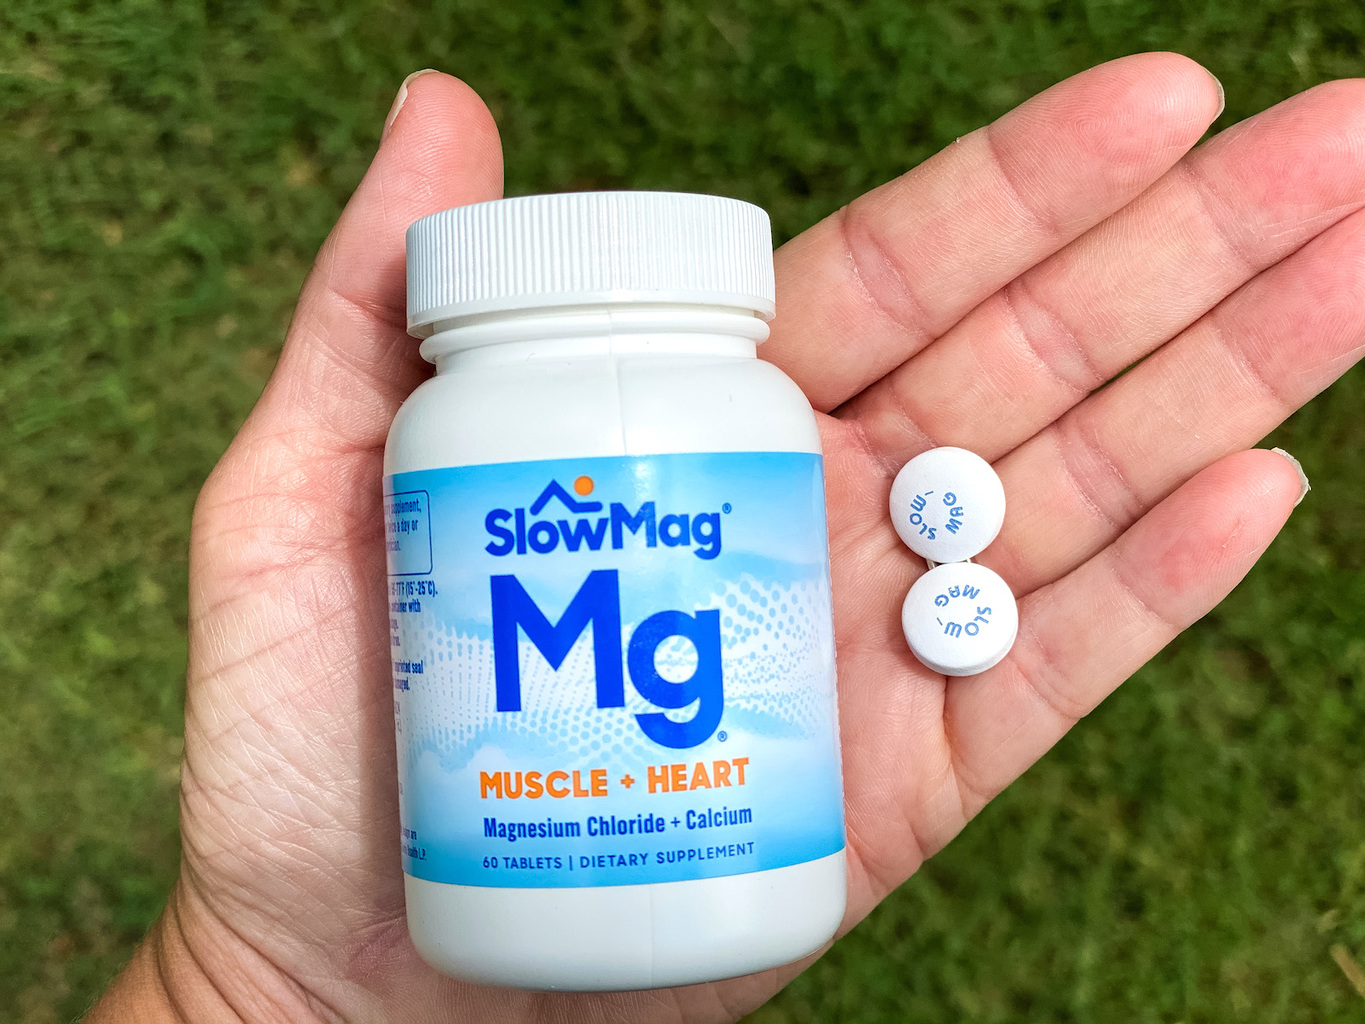 SlowMag MG Two Supplements in the hand